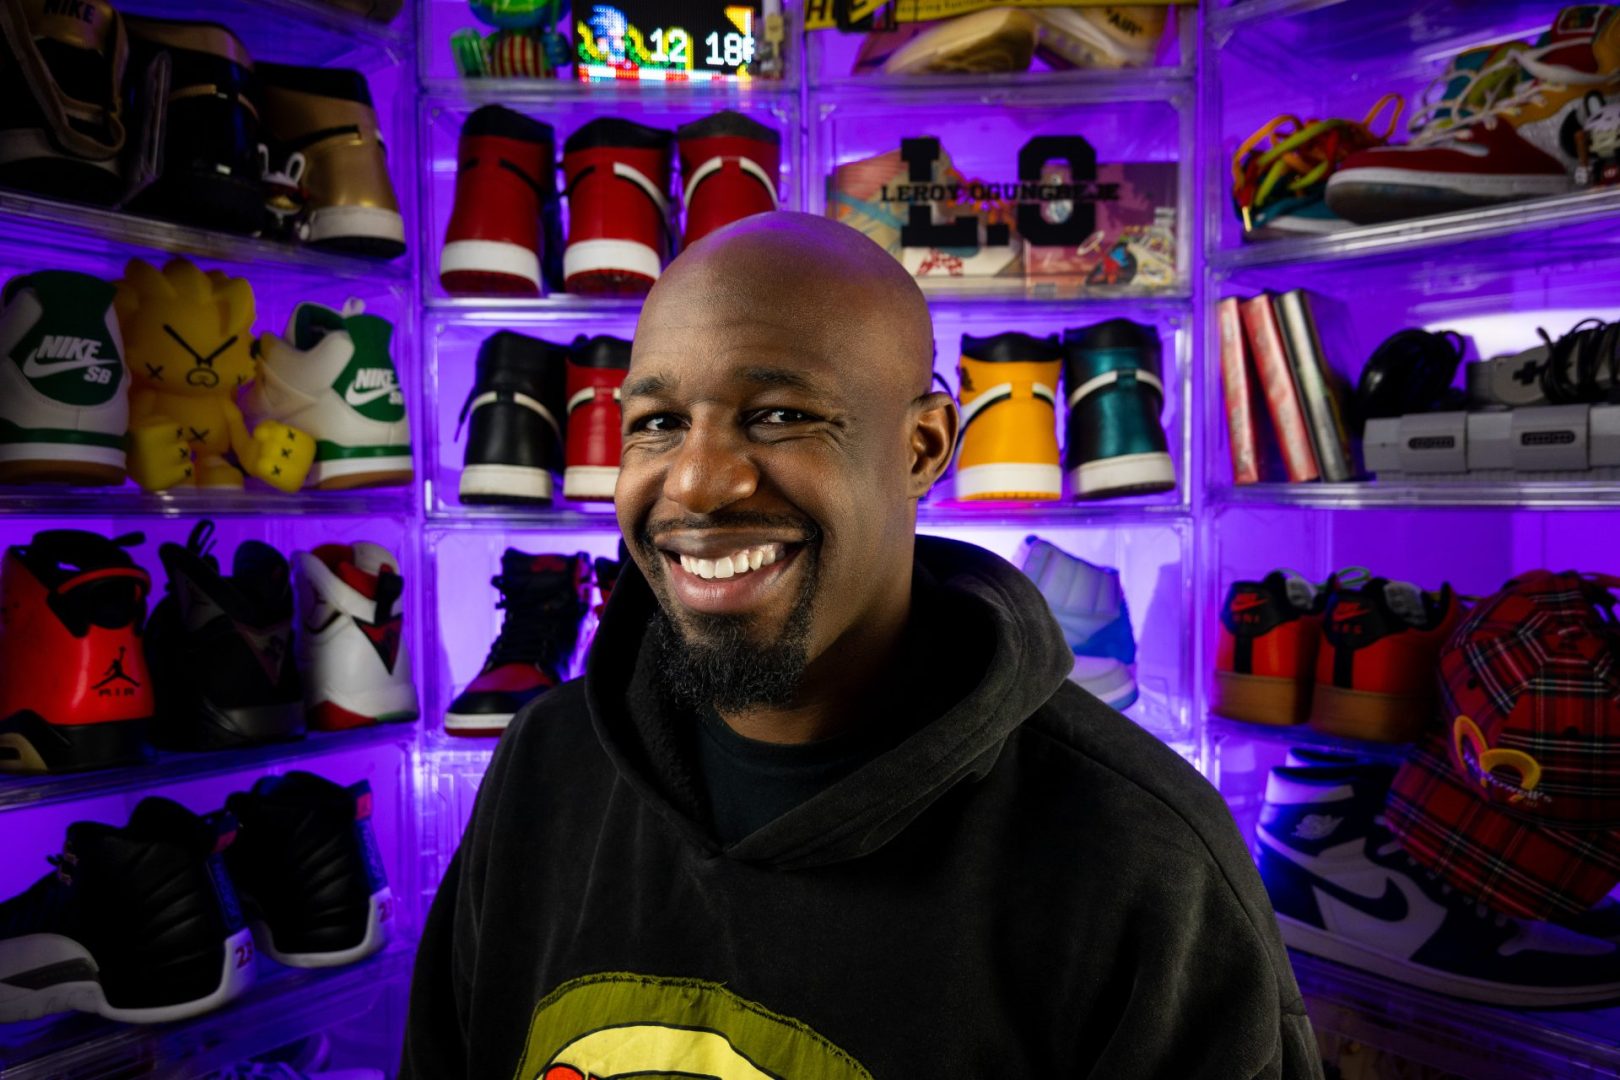 3 things to know about building the ultimate sneaker collection